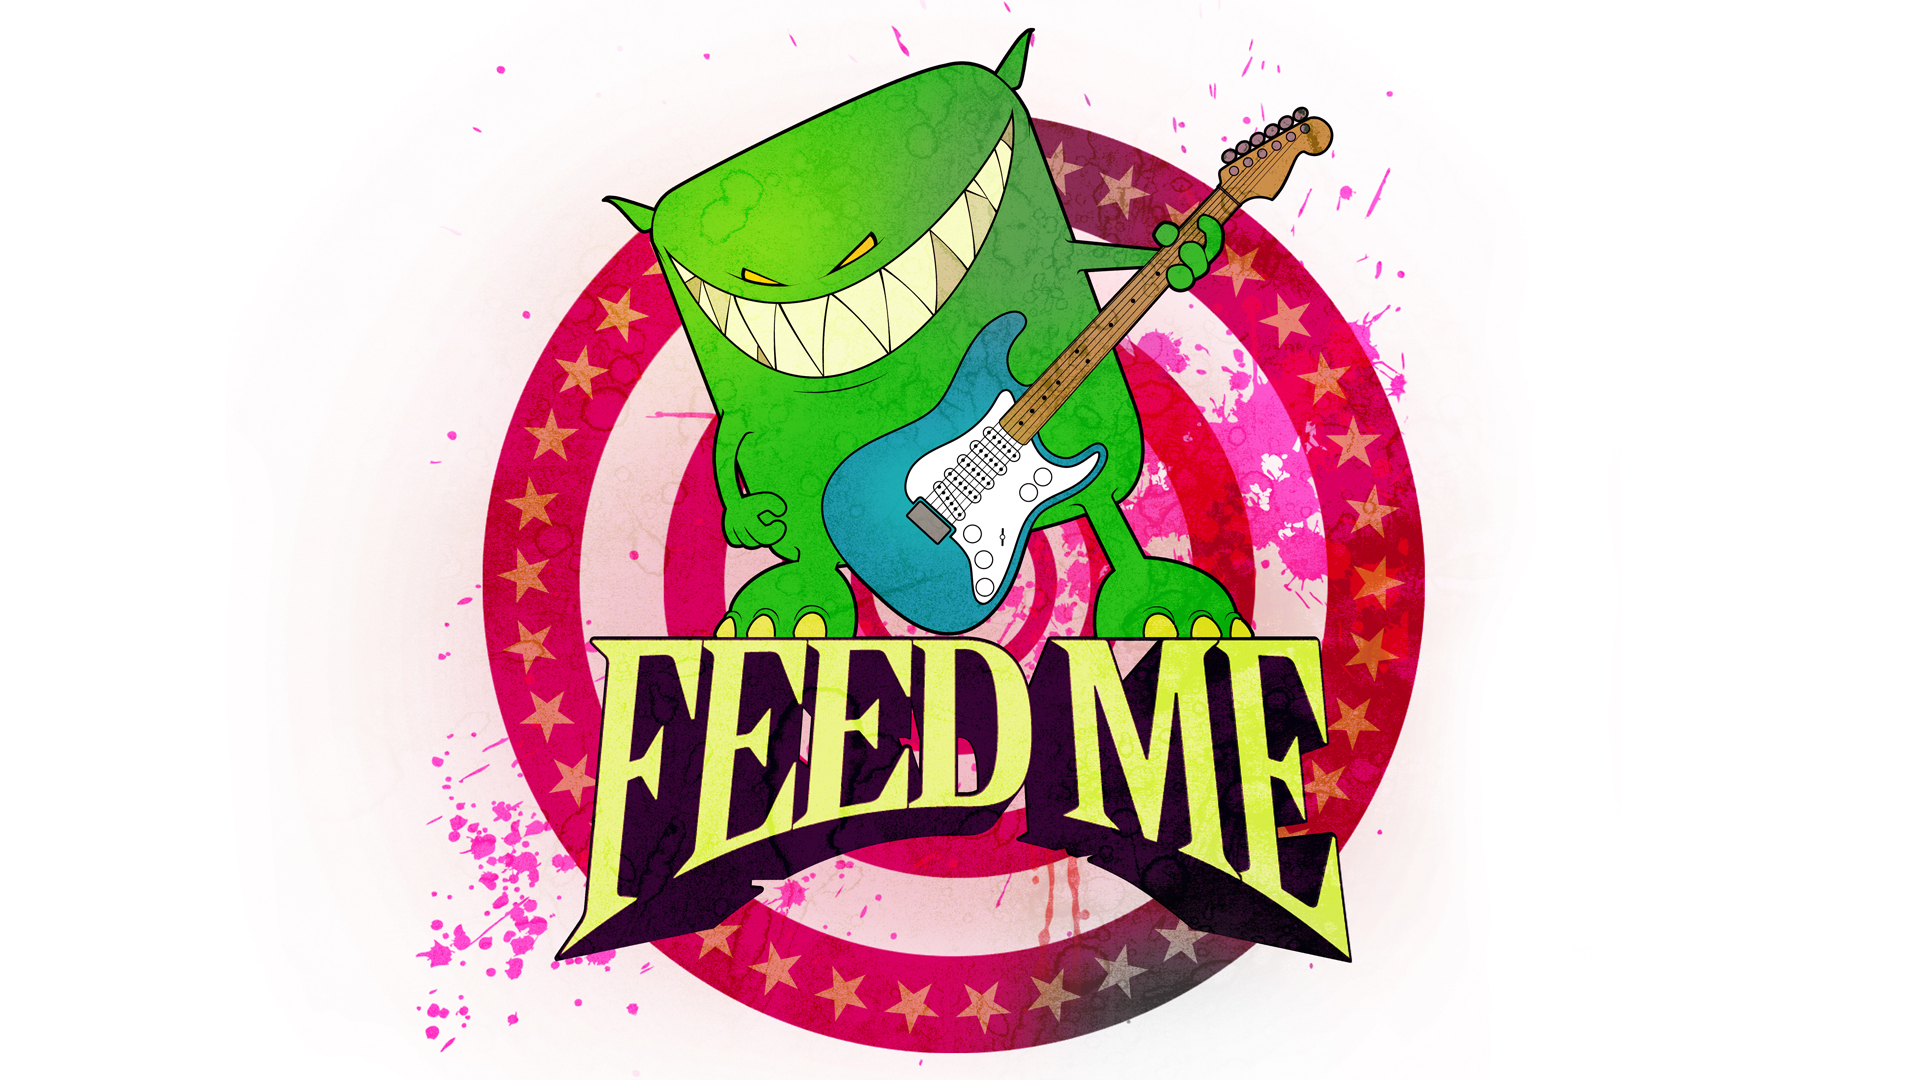 Mrs feed me ent